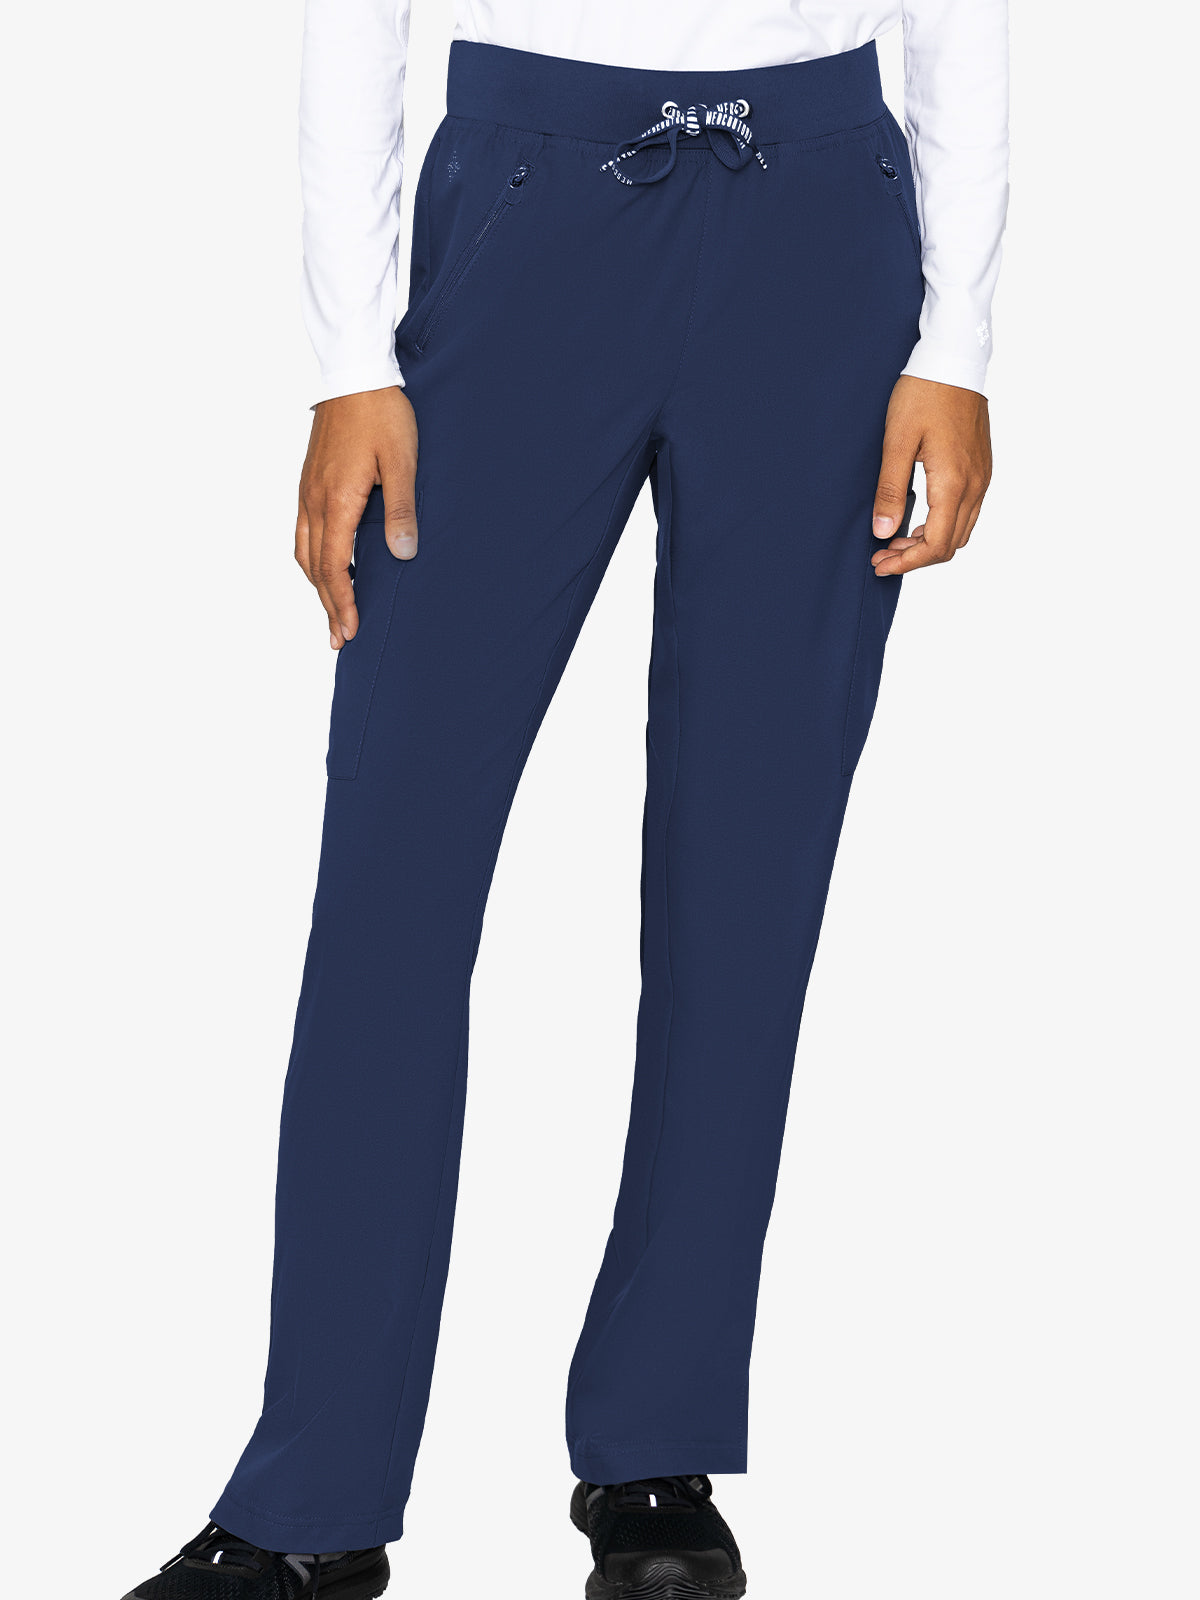 Med Couture 2702 Insight Women's Zipper Pocket Pant Navy